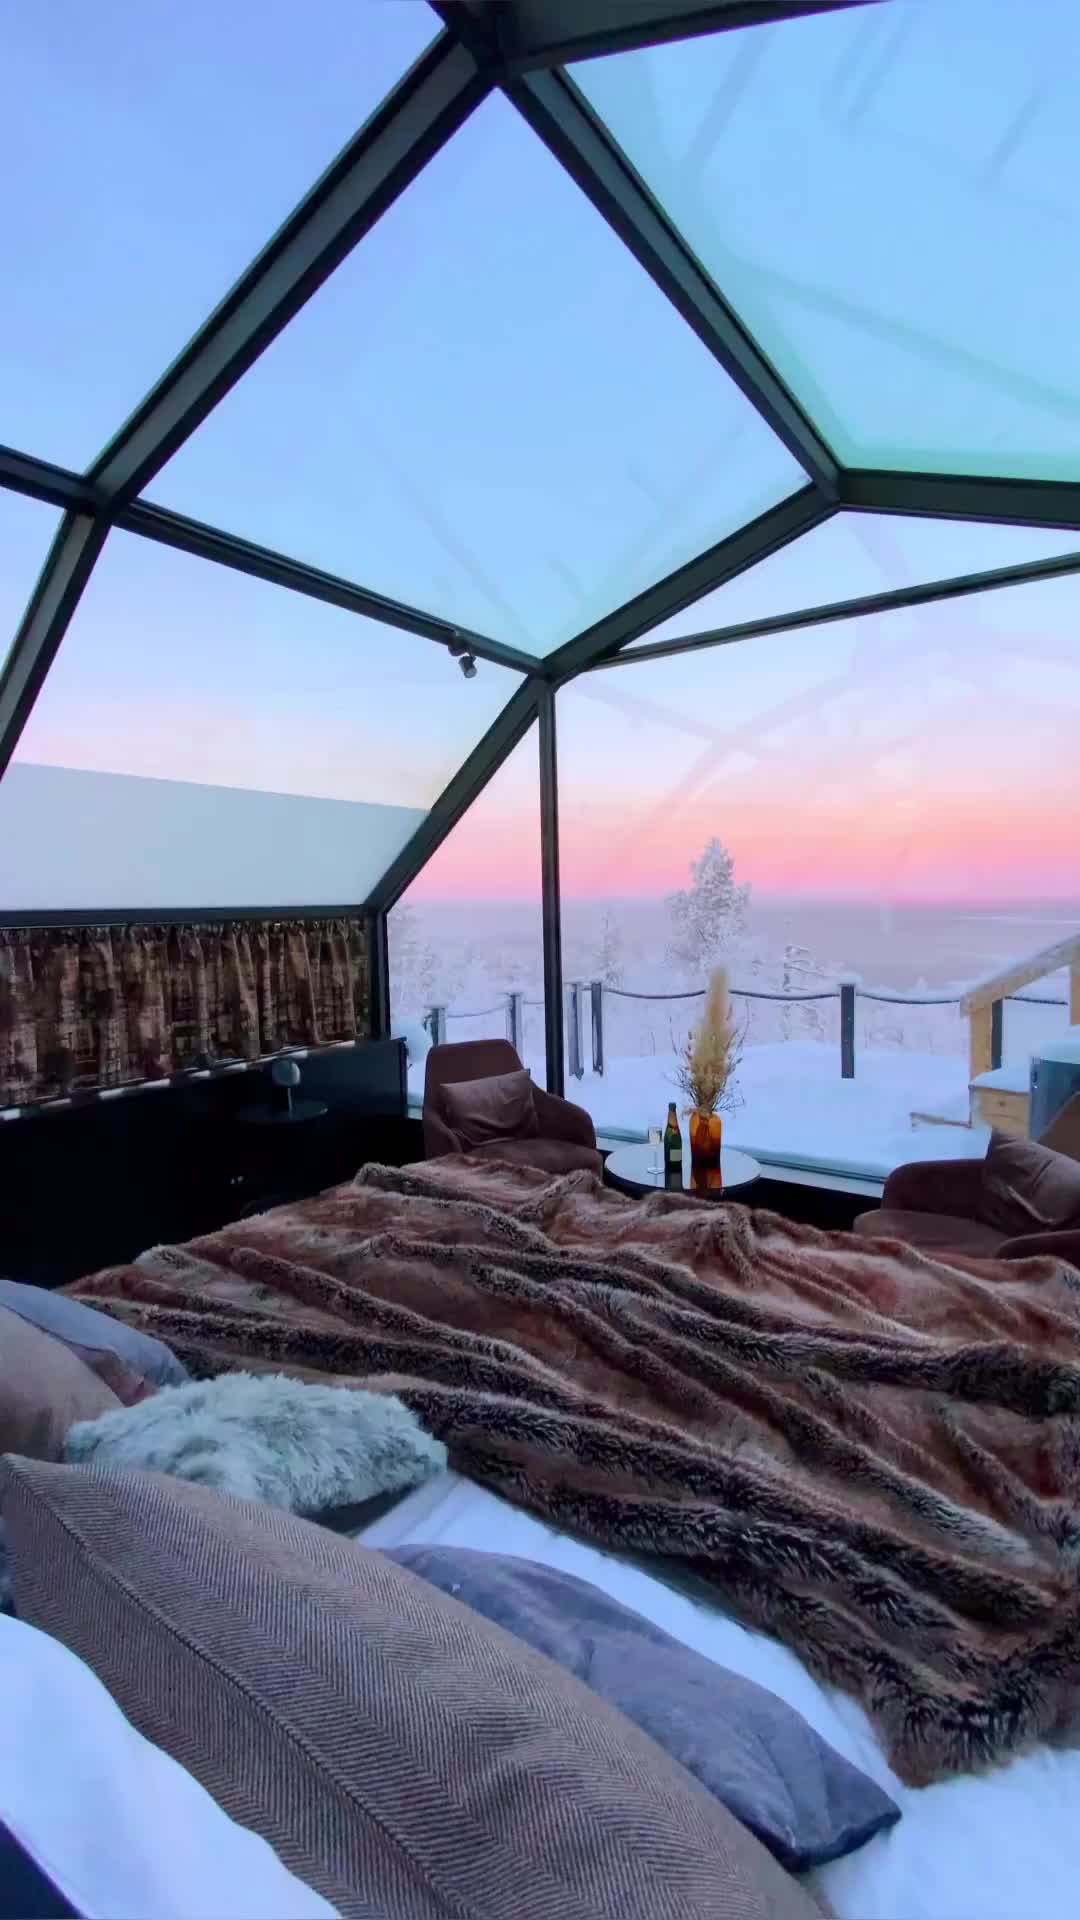 • Tag someone you’d like to go here with •
• Levin Inglut has to do with the Northern Lights! You will stay in a glass igloo and sleep in the motorized bed, so you can adjust it for a perfect view •
·
·
·
·
·
·
#bestplacestogo #earthfocus
#earthofficial #bestvacations
#welivetoexplore #travel
#traveladdict #places_wow
#wonderful_places #hotels
#travellingthroughtheworld 
#beachesnresorts 
#explorer
#love #sunset #sunrise 
#bestvacations #finland 
 #living_hotels #glorioushotels #visitfinland
#discoverfinland #ig_hotels #resortsmagazine #tasteinhotels #leviniglut #goldencrown